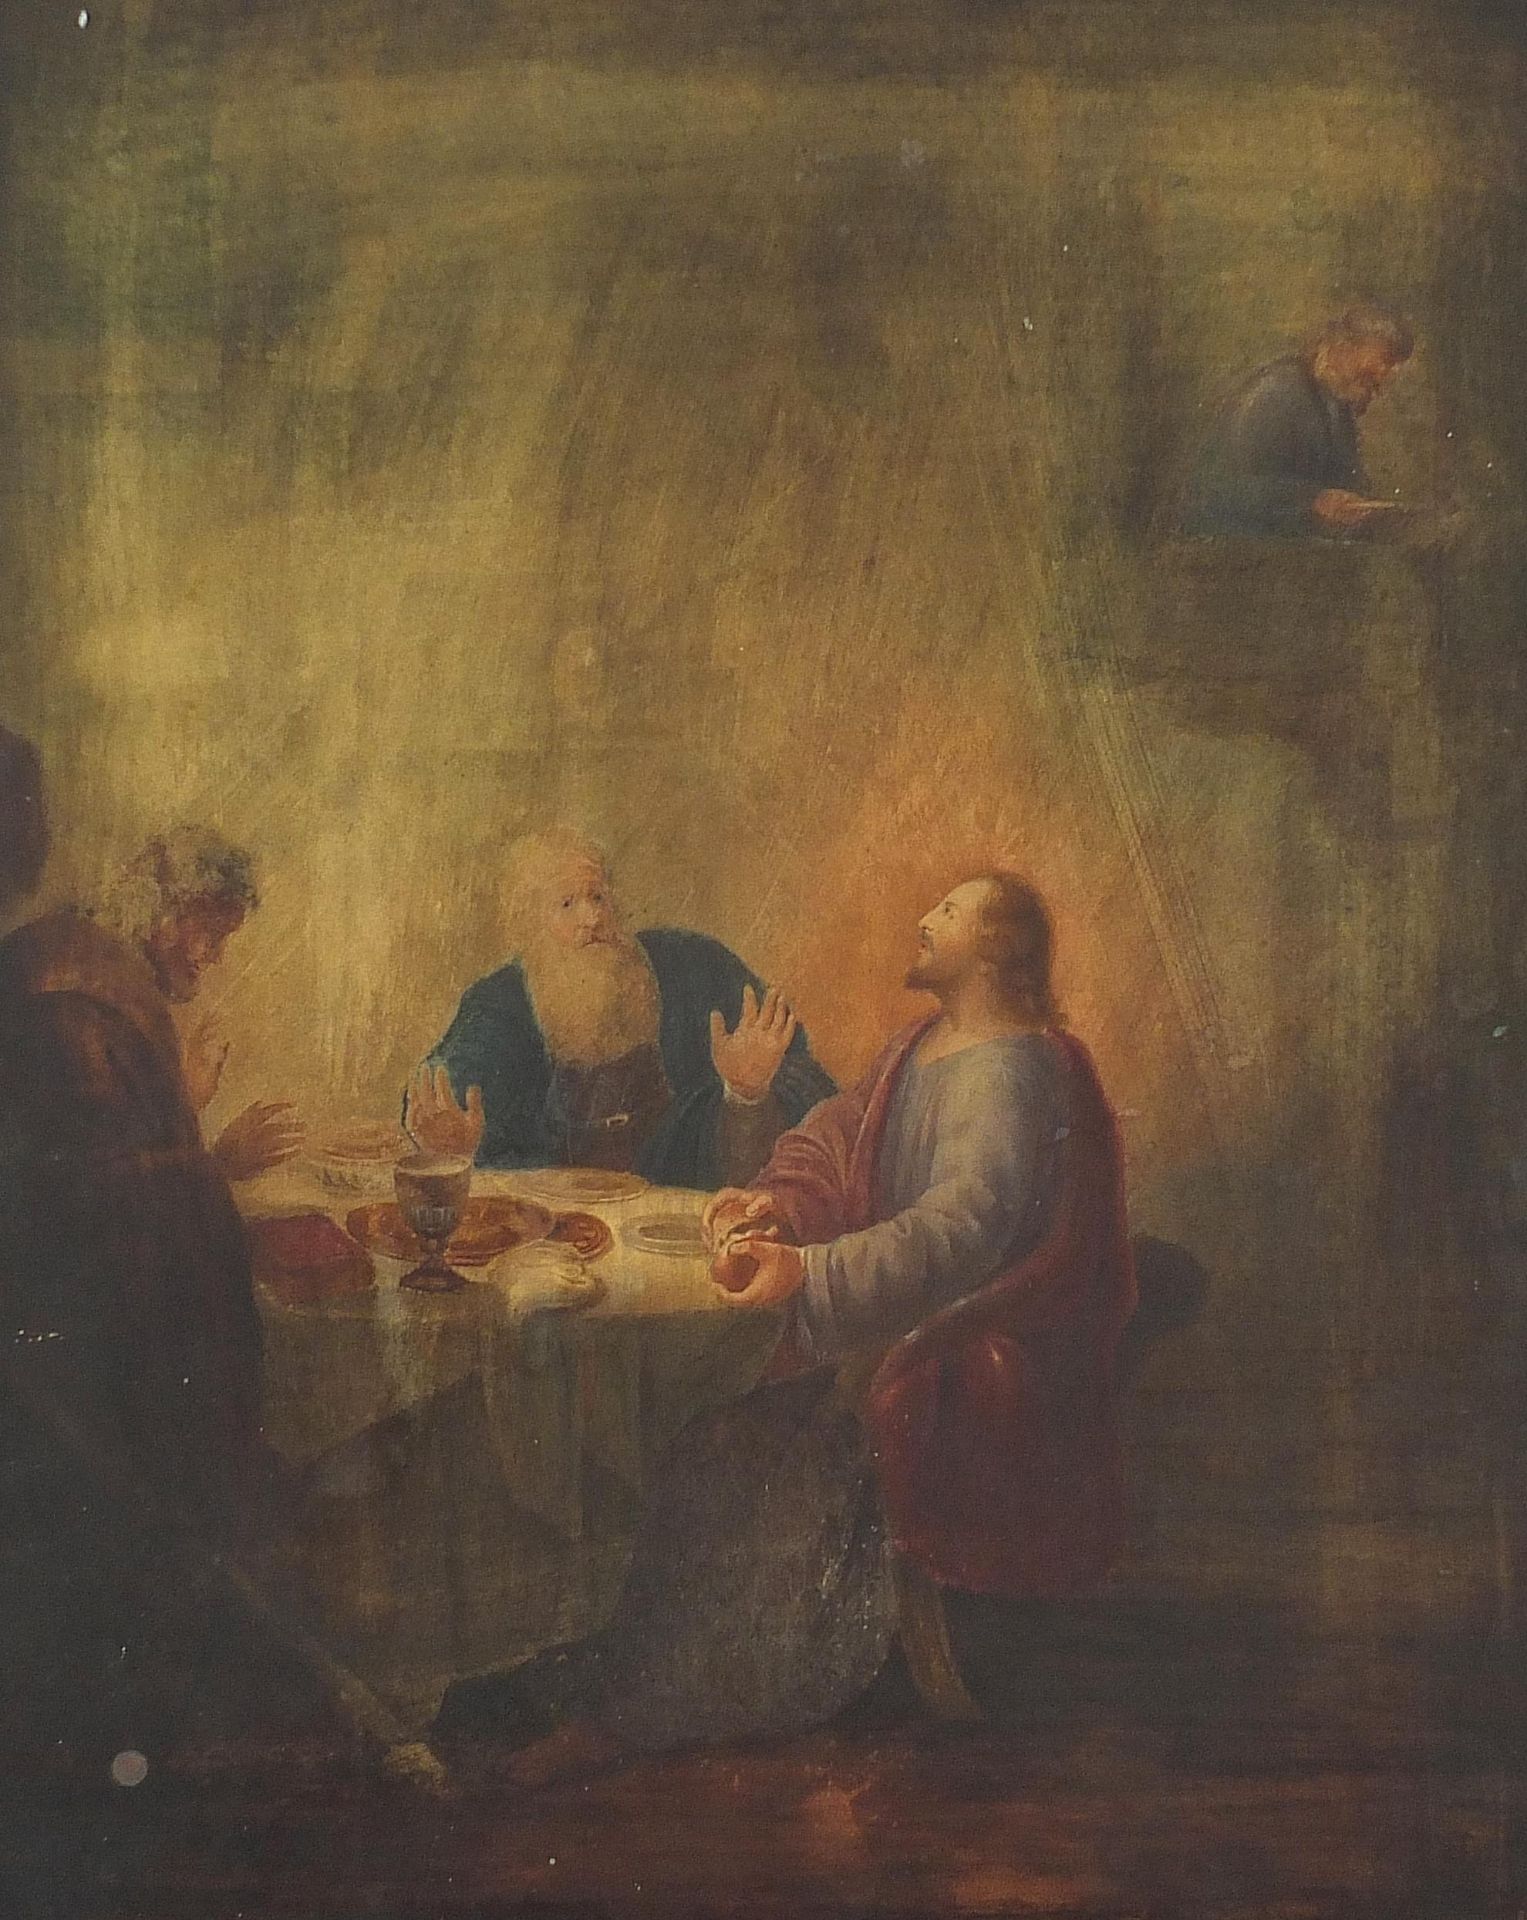 After Rembrandt Van Rijn - The Supper at Emmaus, 19th century Dutch school watercolour, framed and